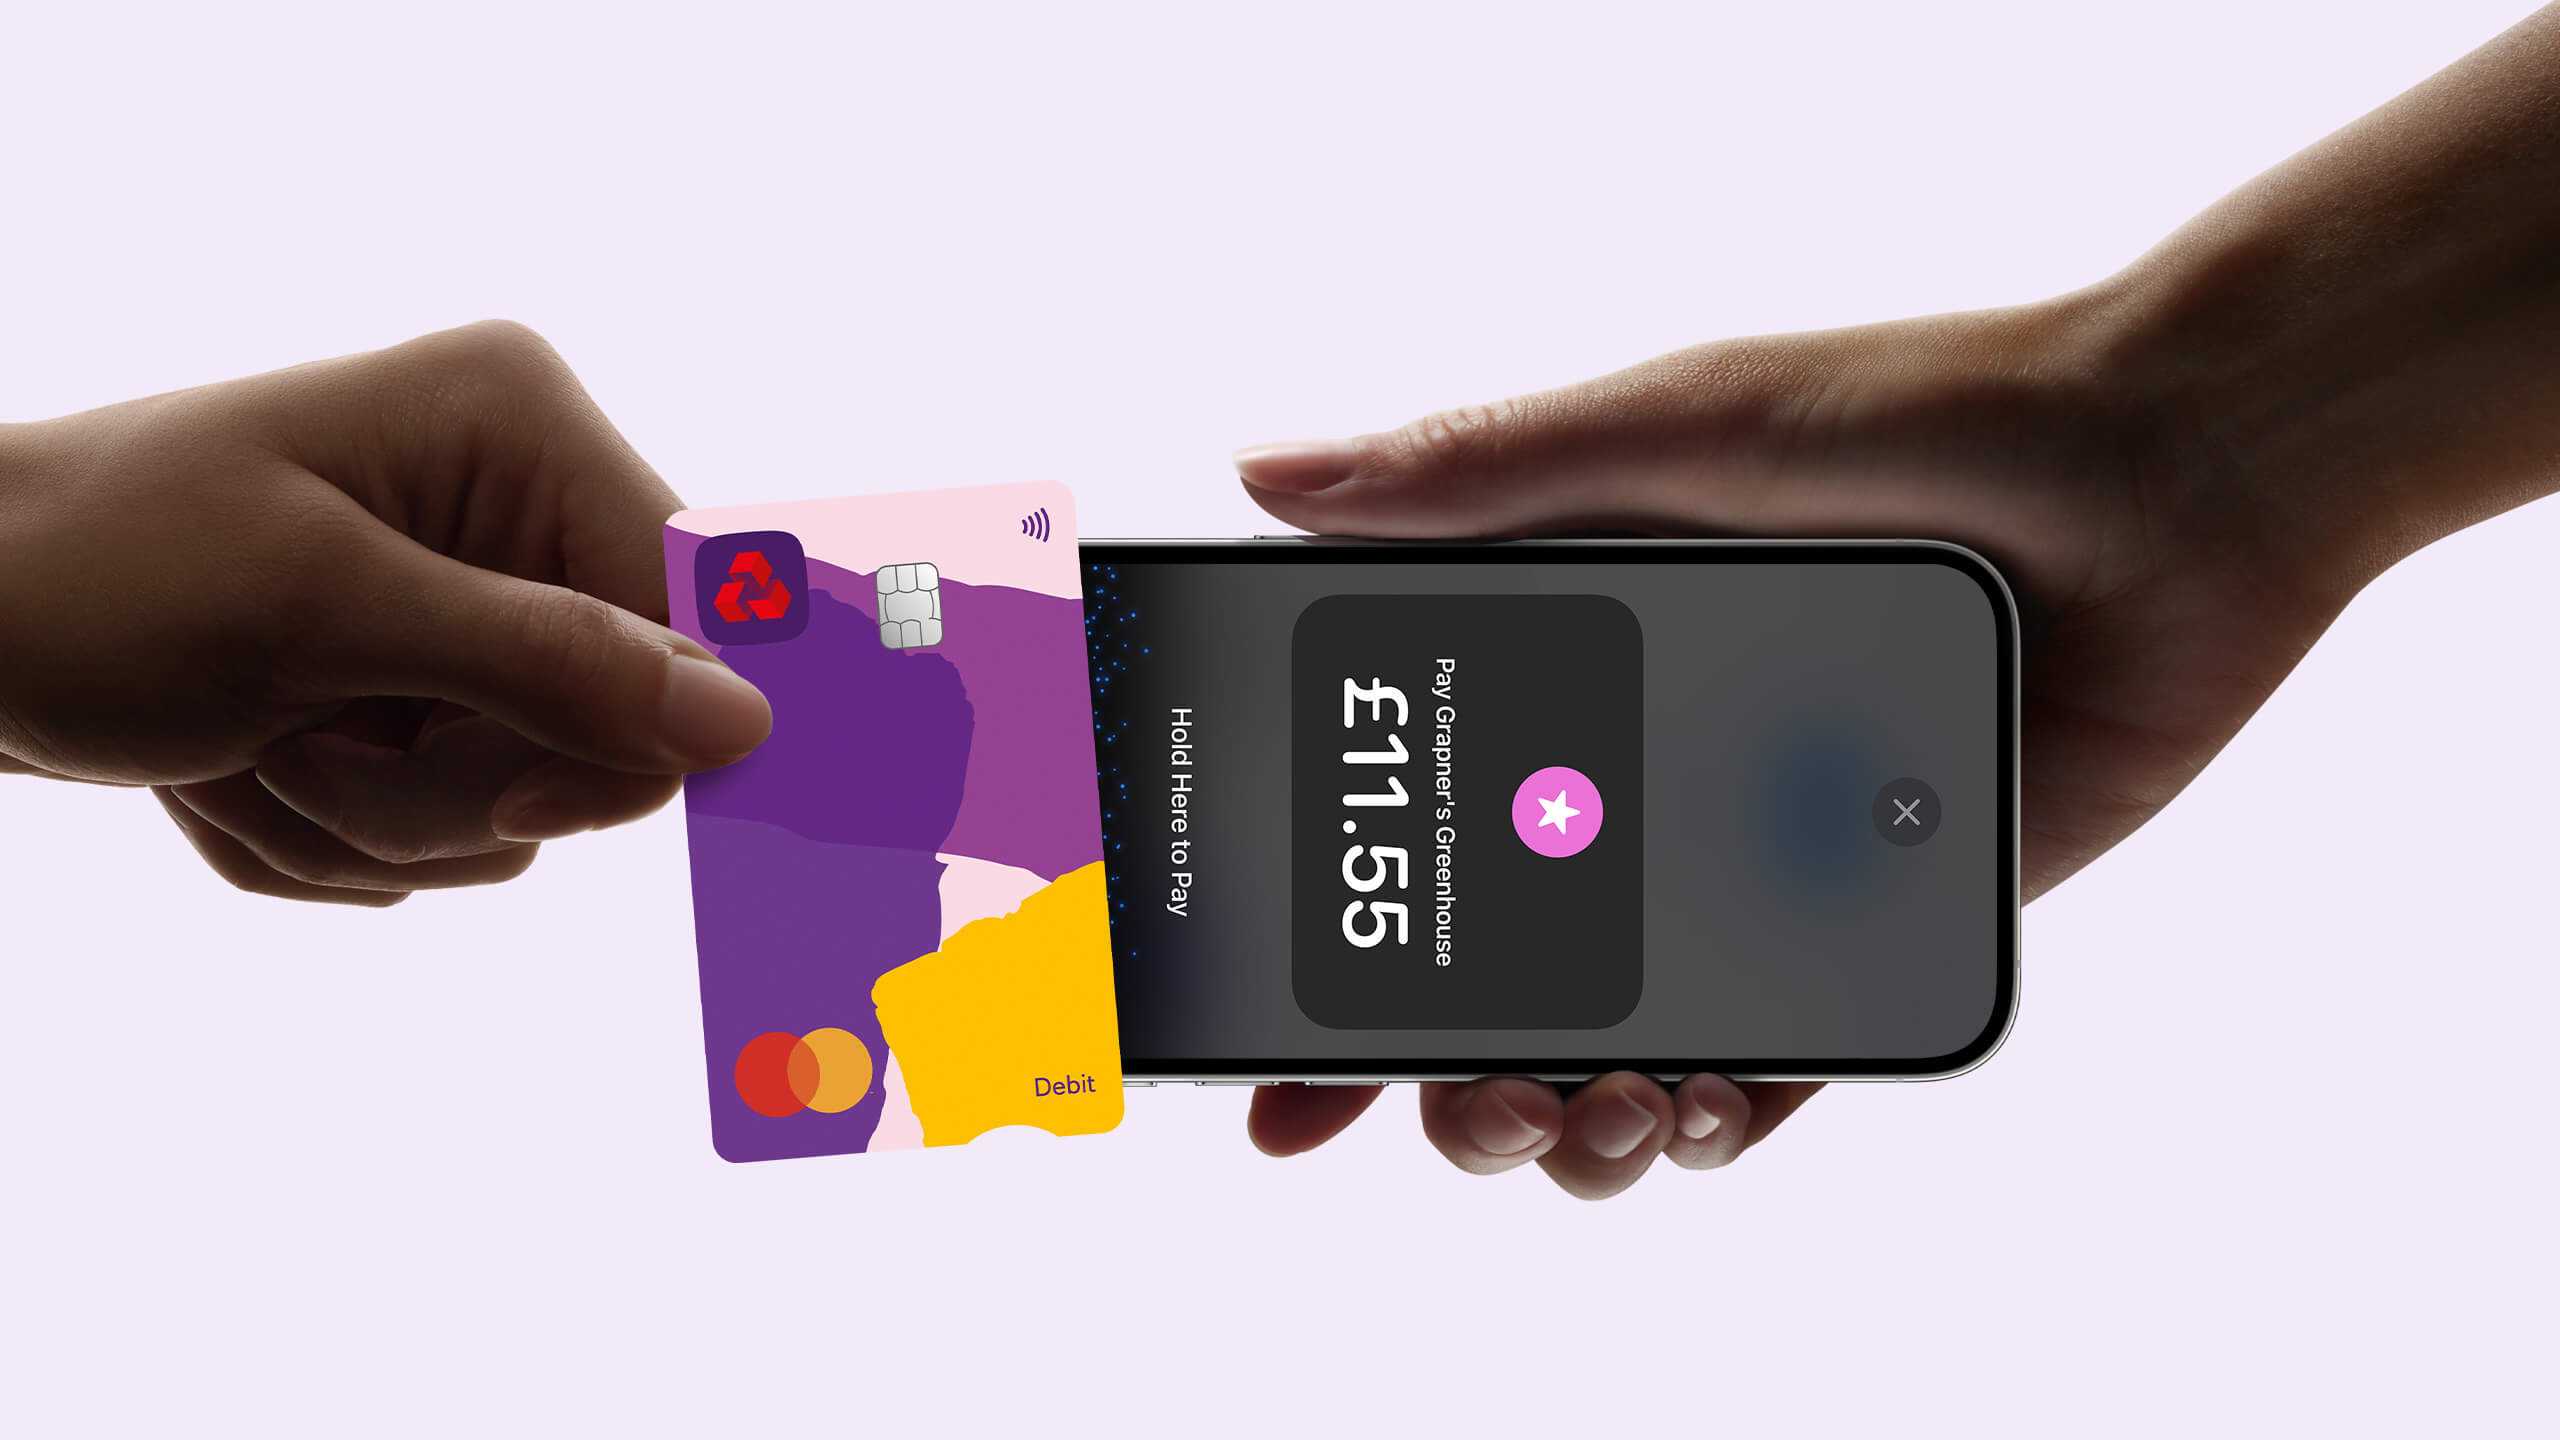 Contactless payment cards